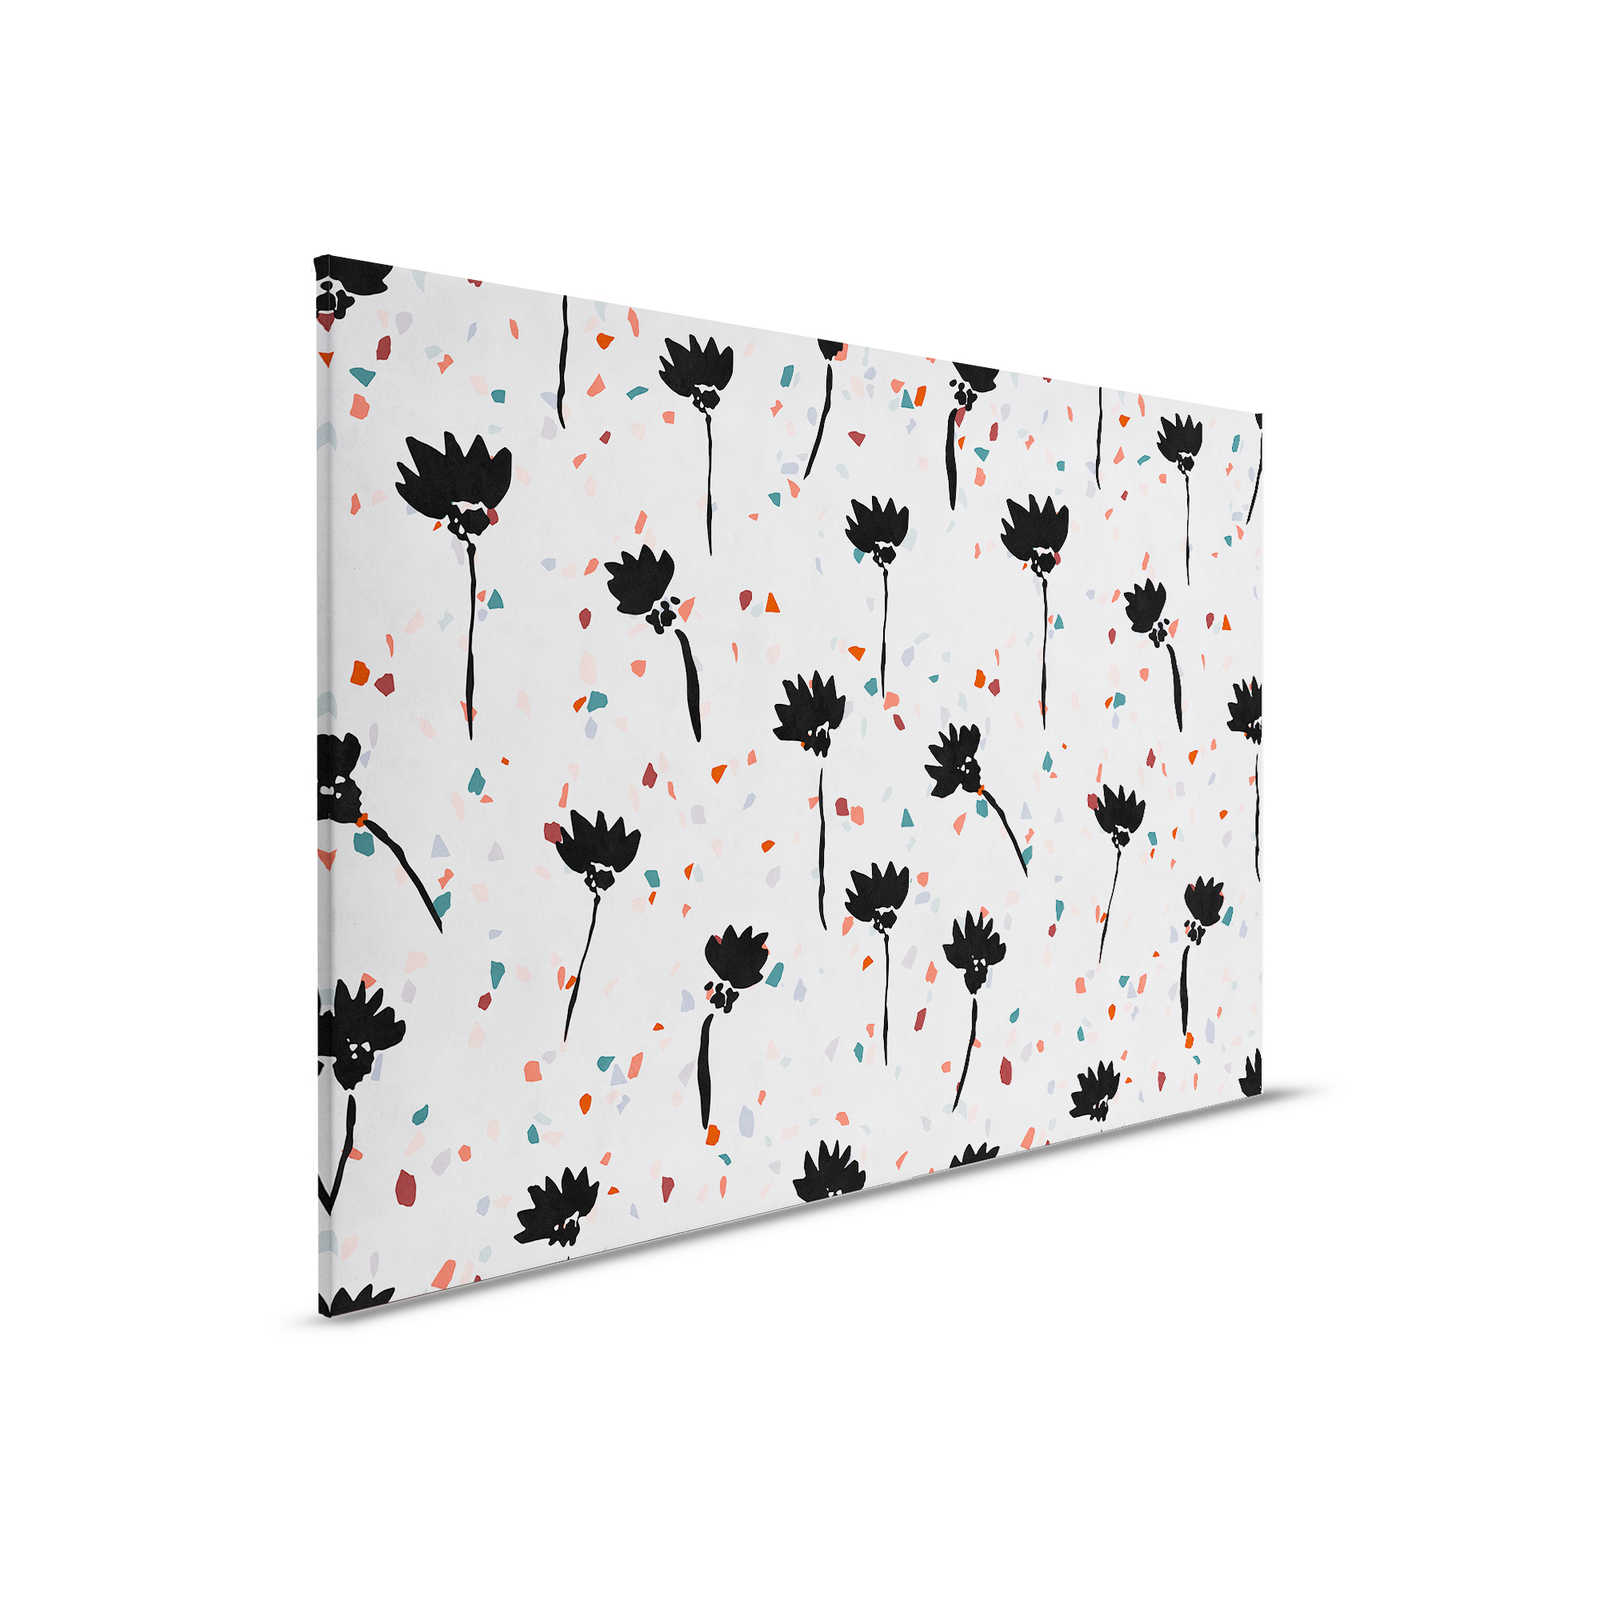         Terrazzo 2 - Canvas painting in blotting paper structure terrazzo patterned, stone look - 0.90 m x 0.60 m
    